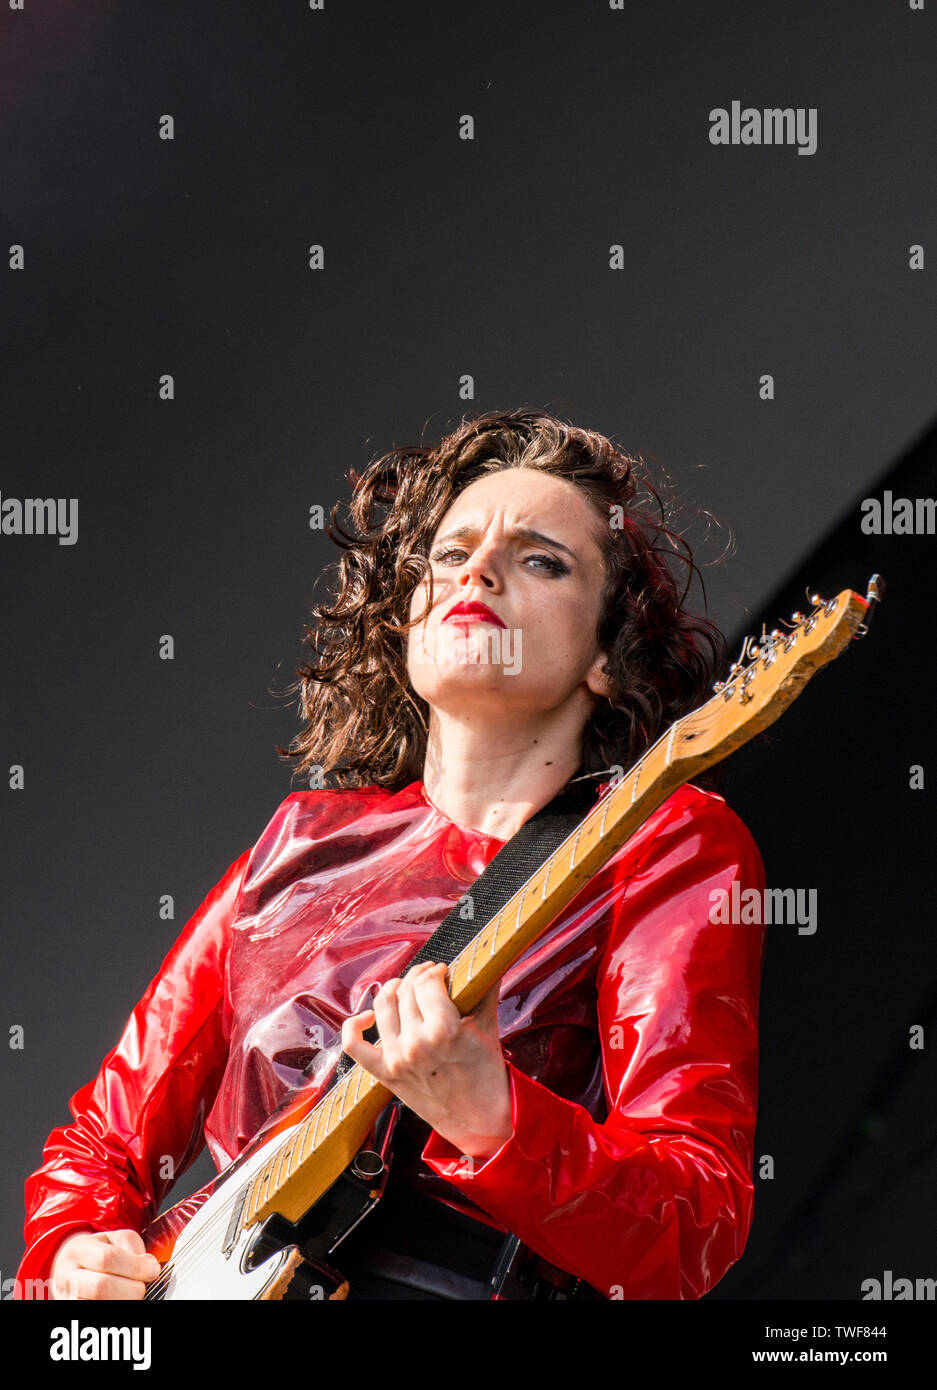 British rock singer and guitarist Anna Calvi performing live at the All Points East music festival at Victoria Park in London. Stock Photo